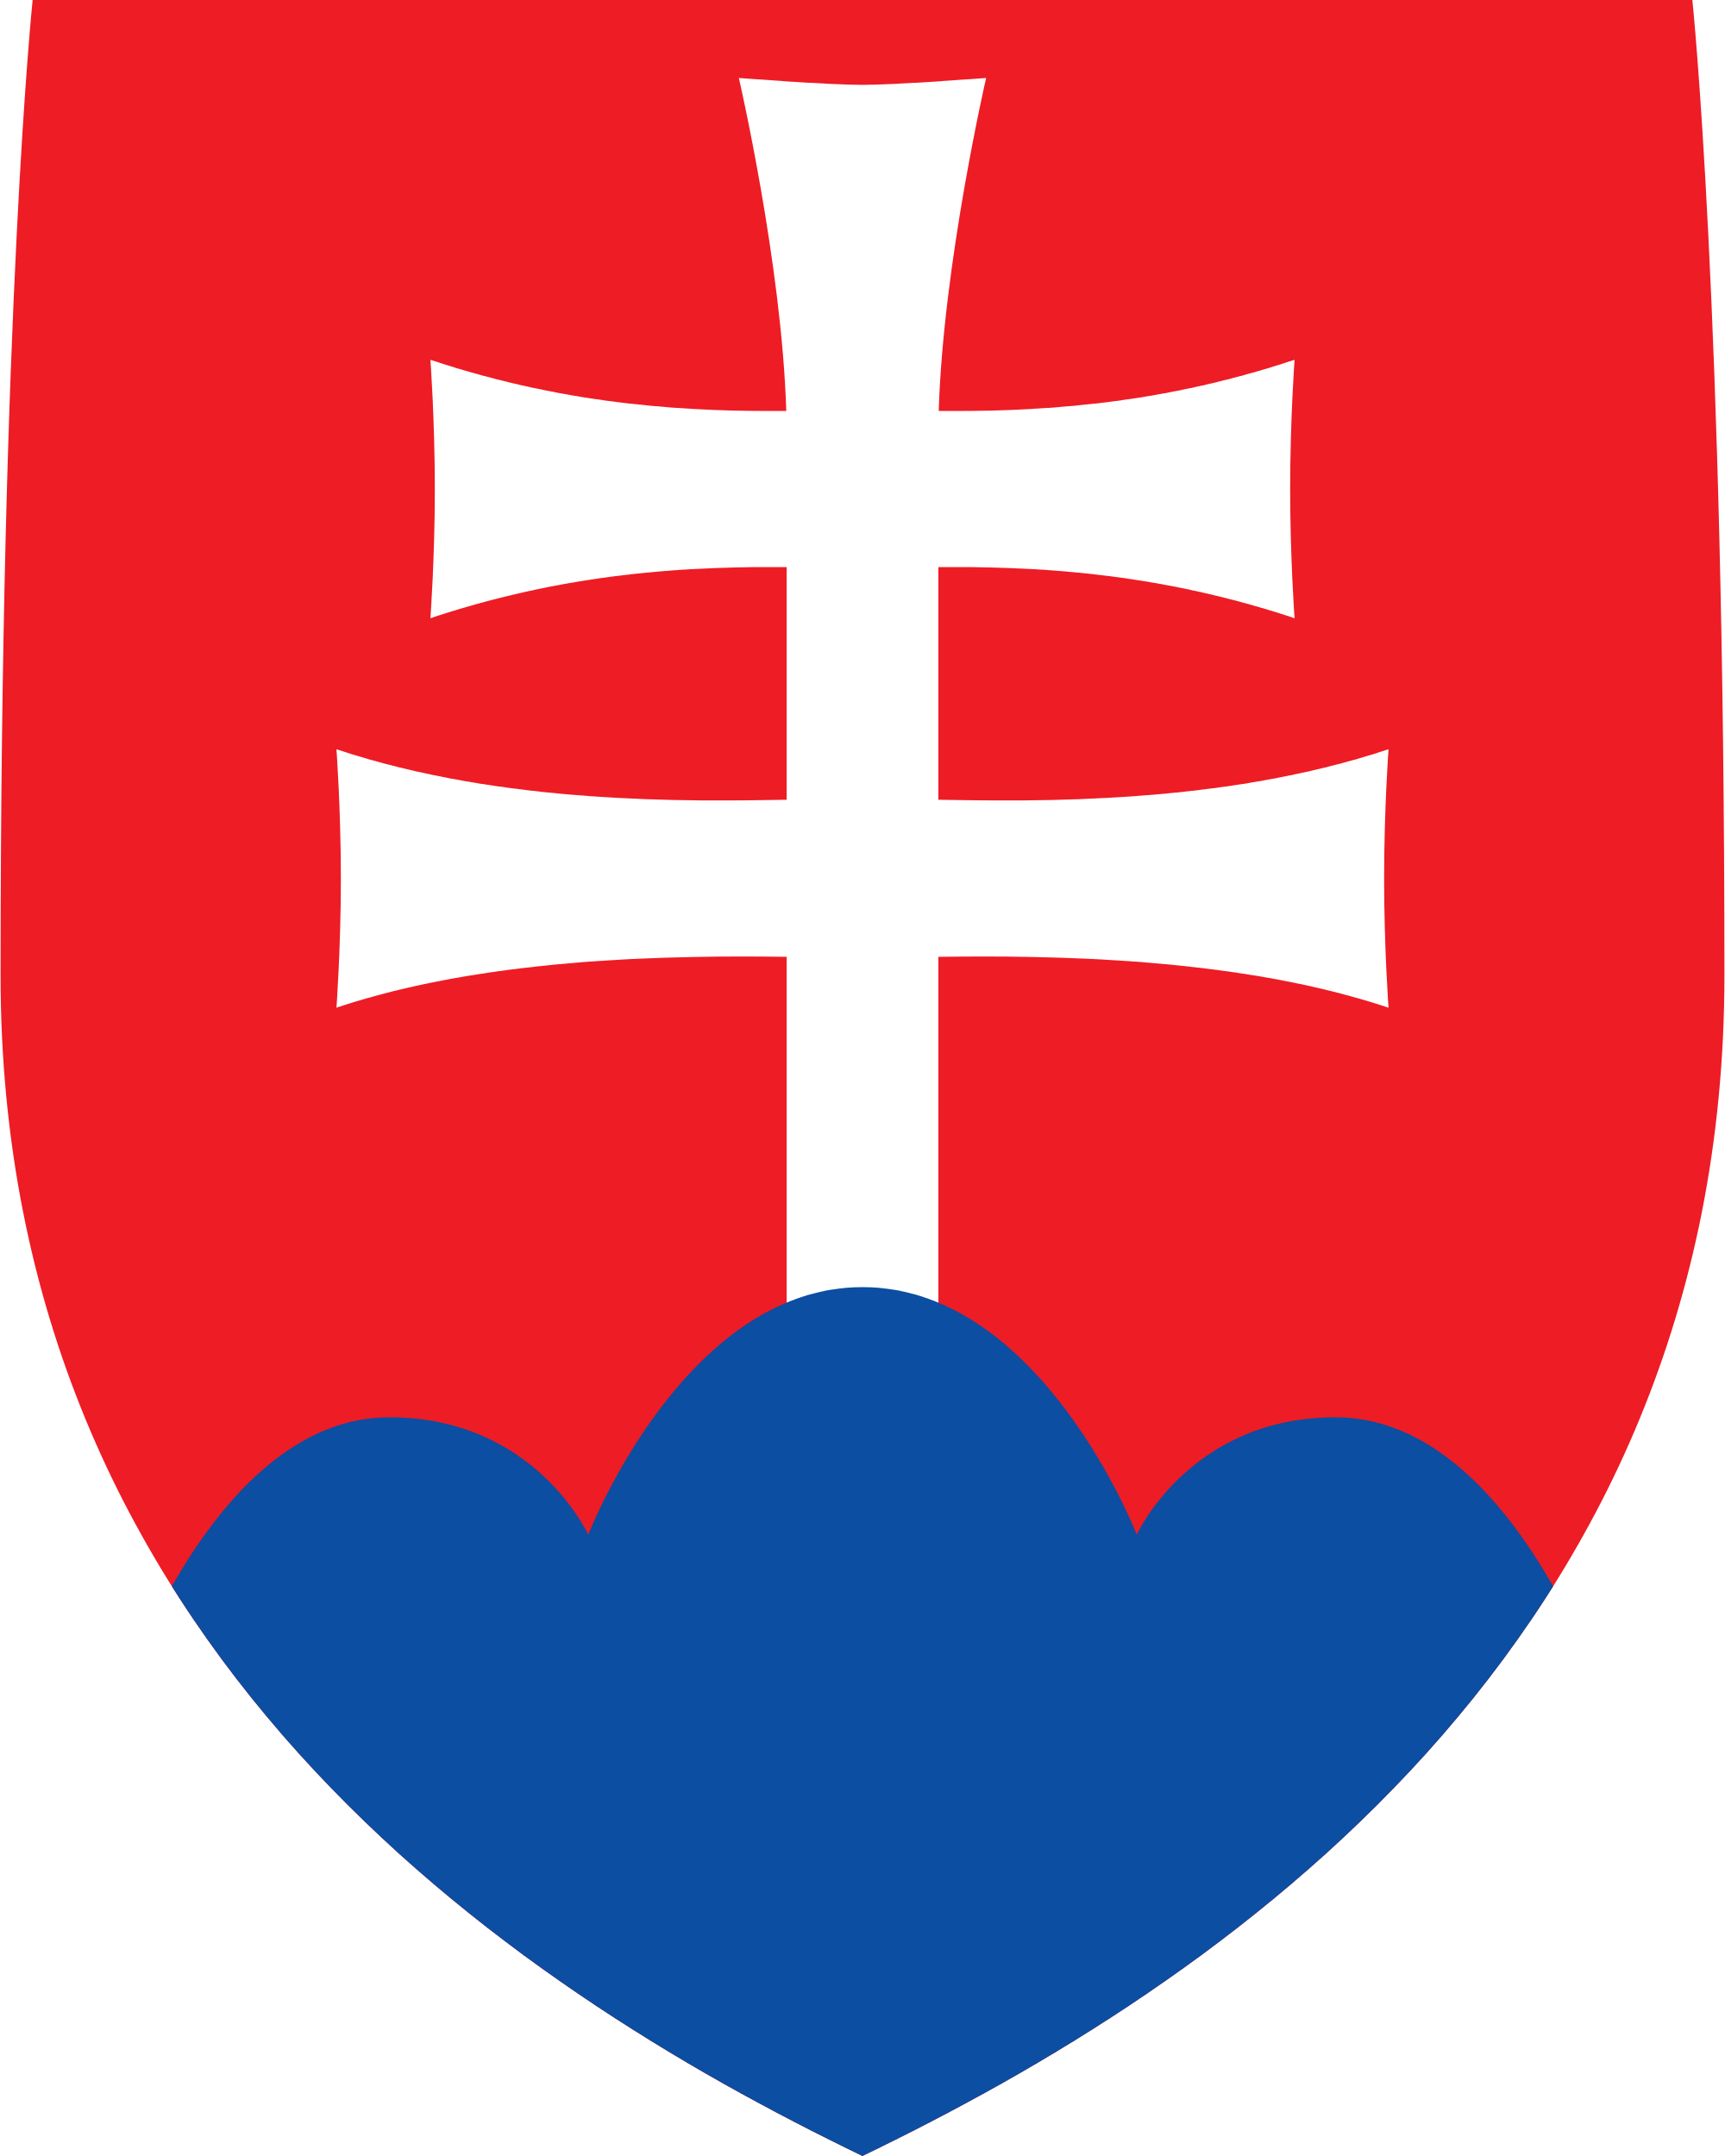 Red Shield with White Cross Logo - Coat of arms of Slovakia